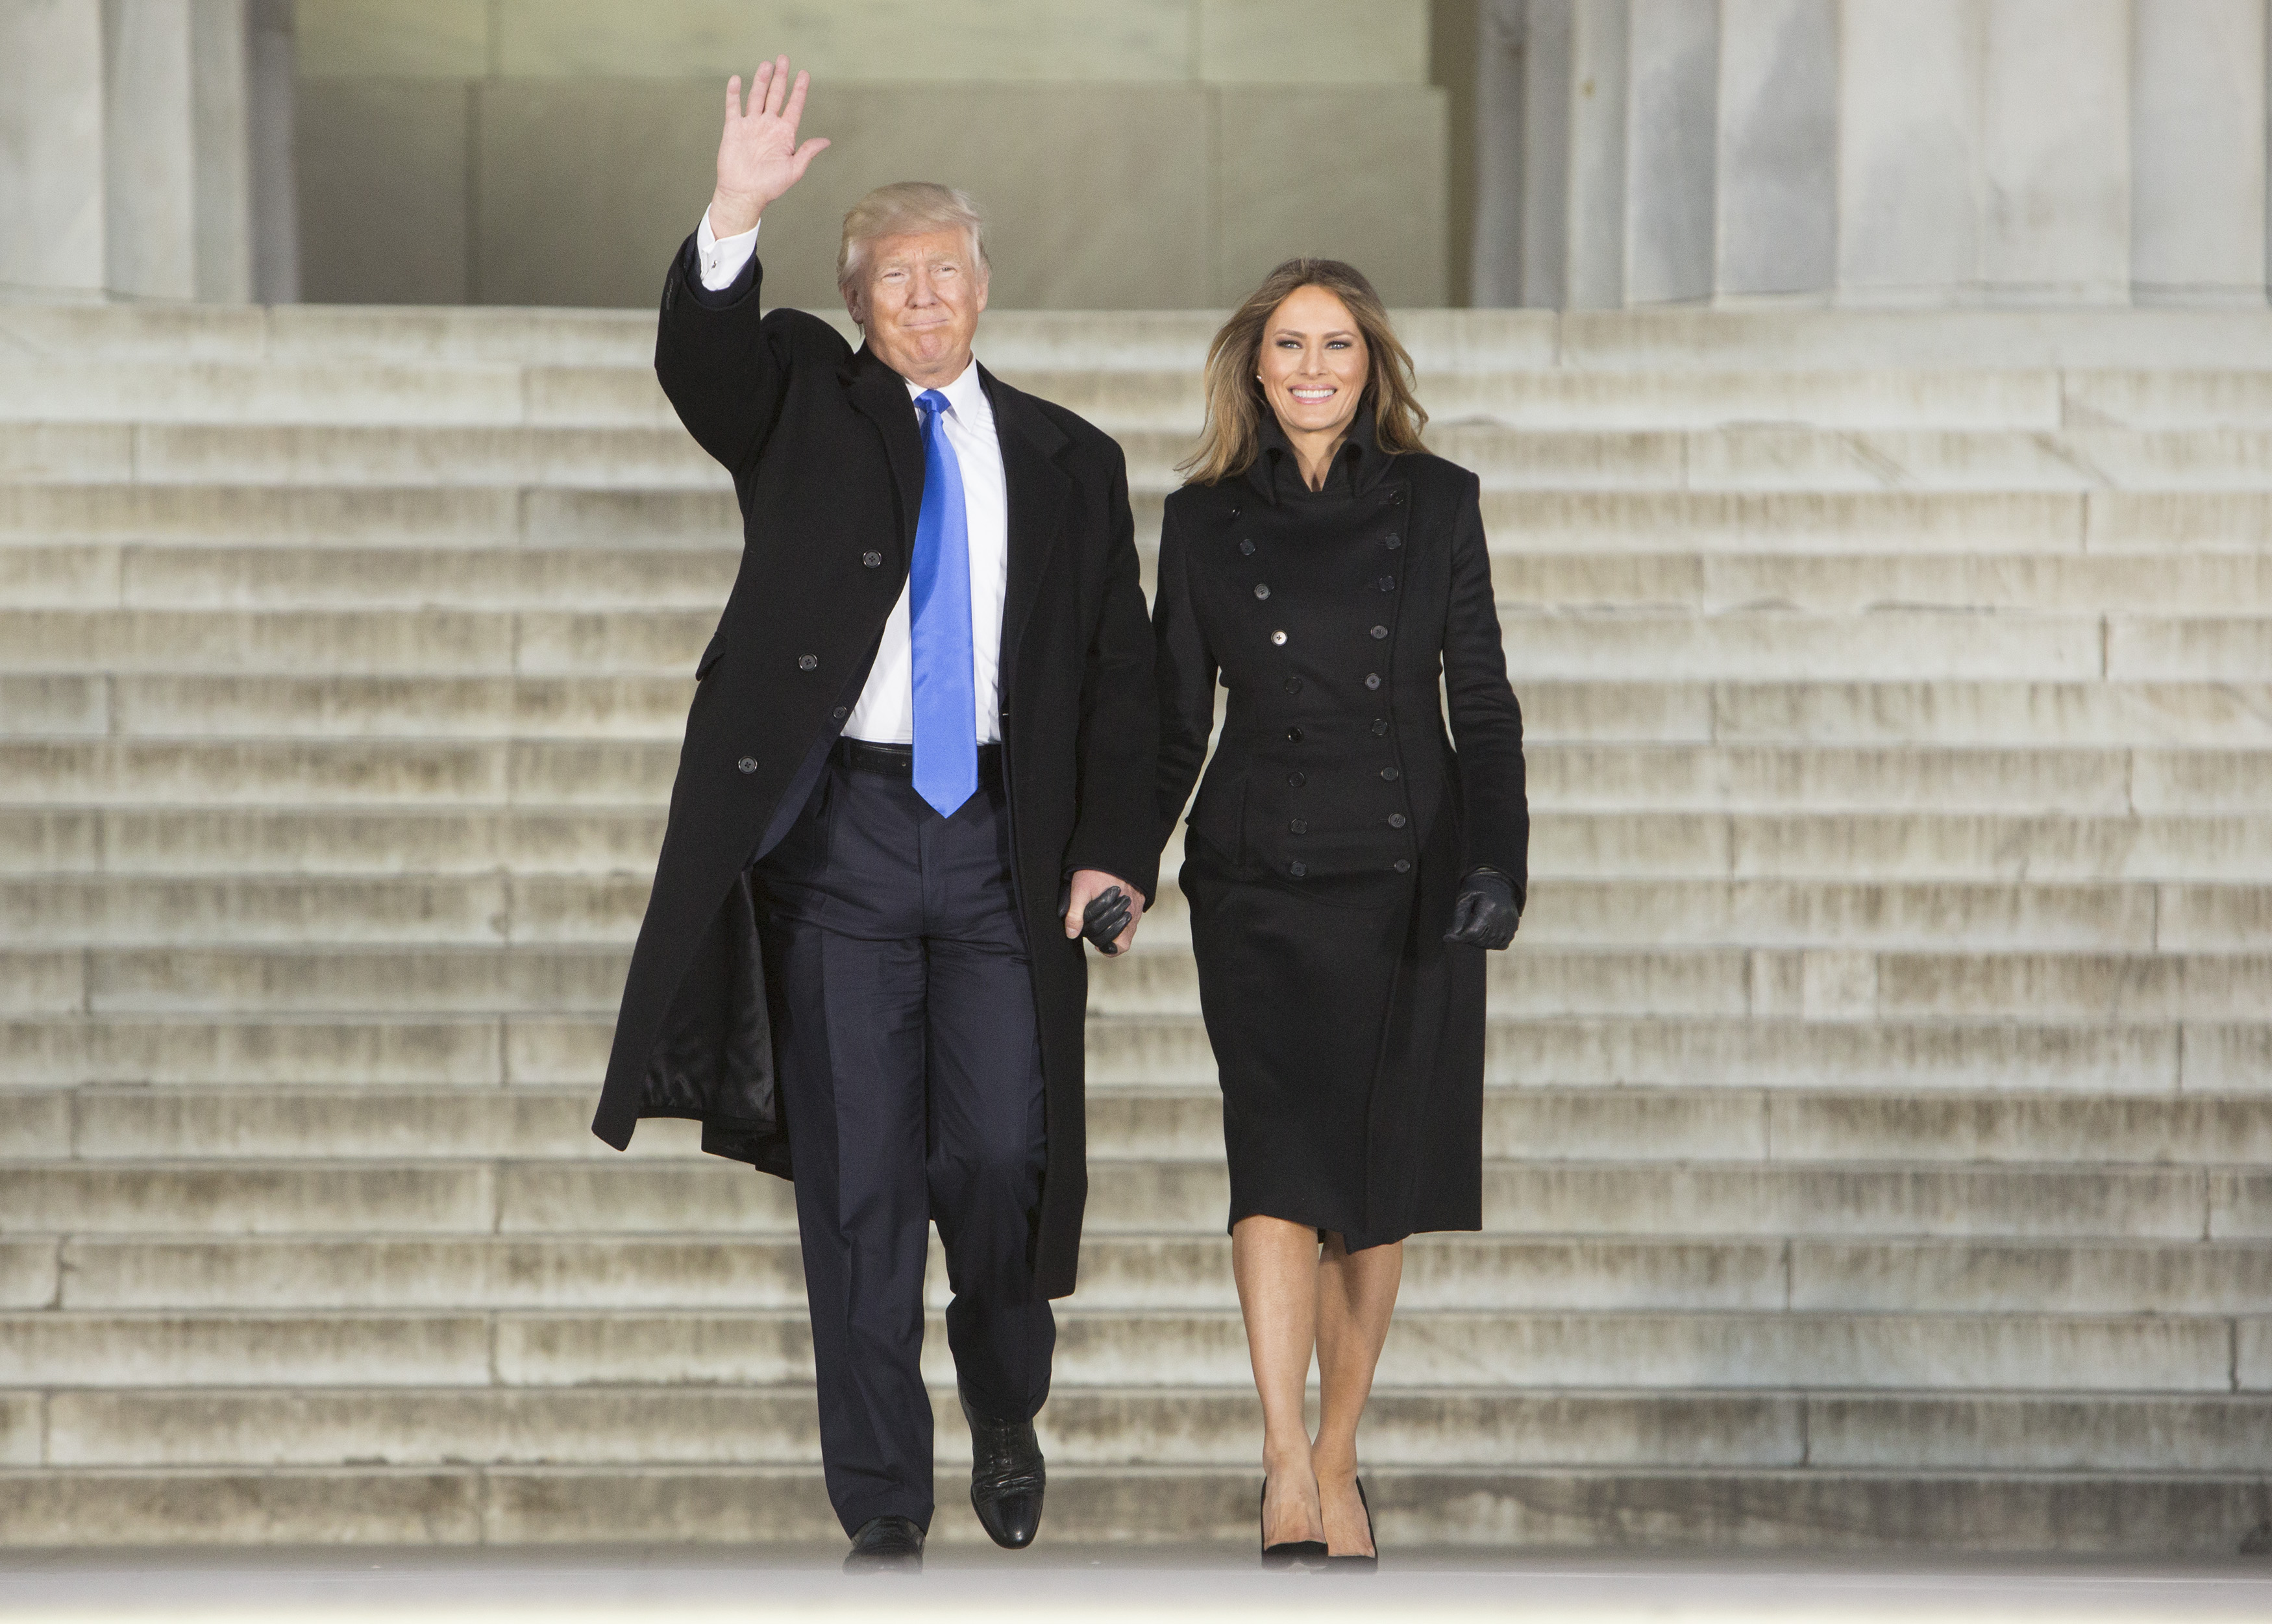 President-elect Donald Trump and his wife Melania Trump arrive at the "Make America Great Again" Welcome Celebration concert at the Lincoln Memorial in Washington, D.C., on Jan. 19, 2017. (Chris Kleponis—Bloomberg/Getty Images)